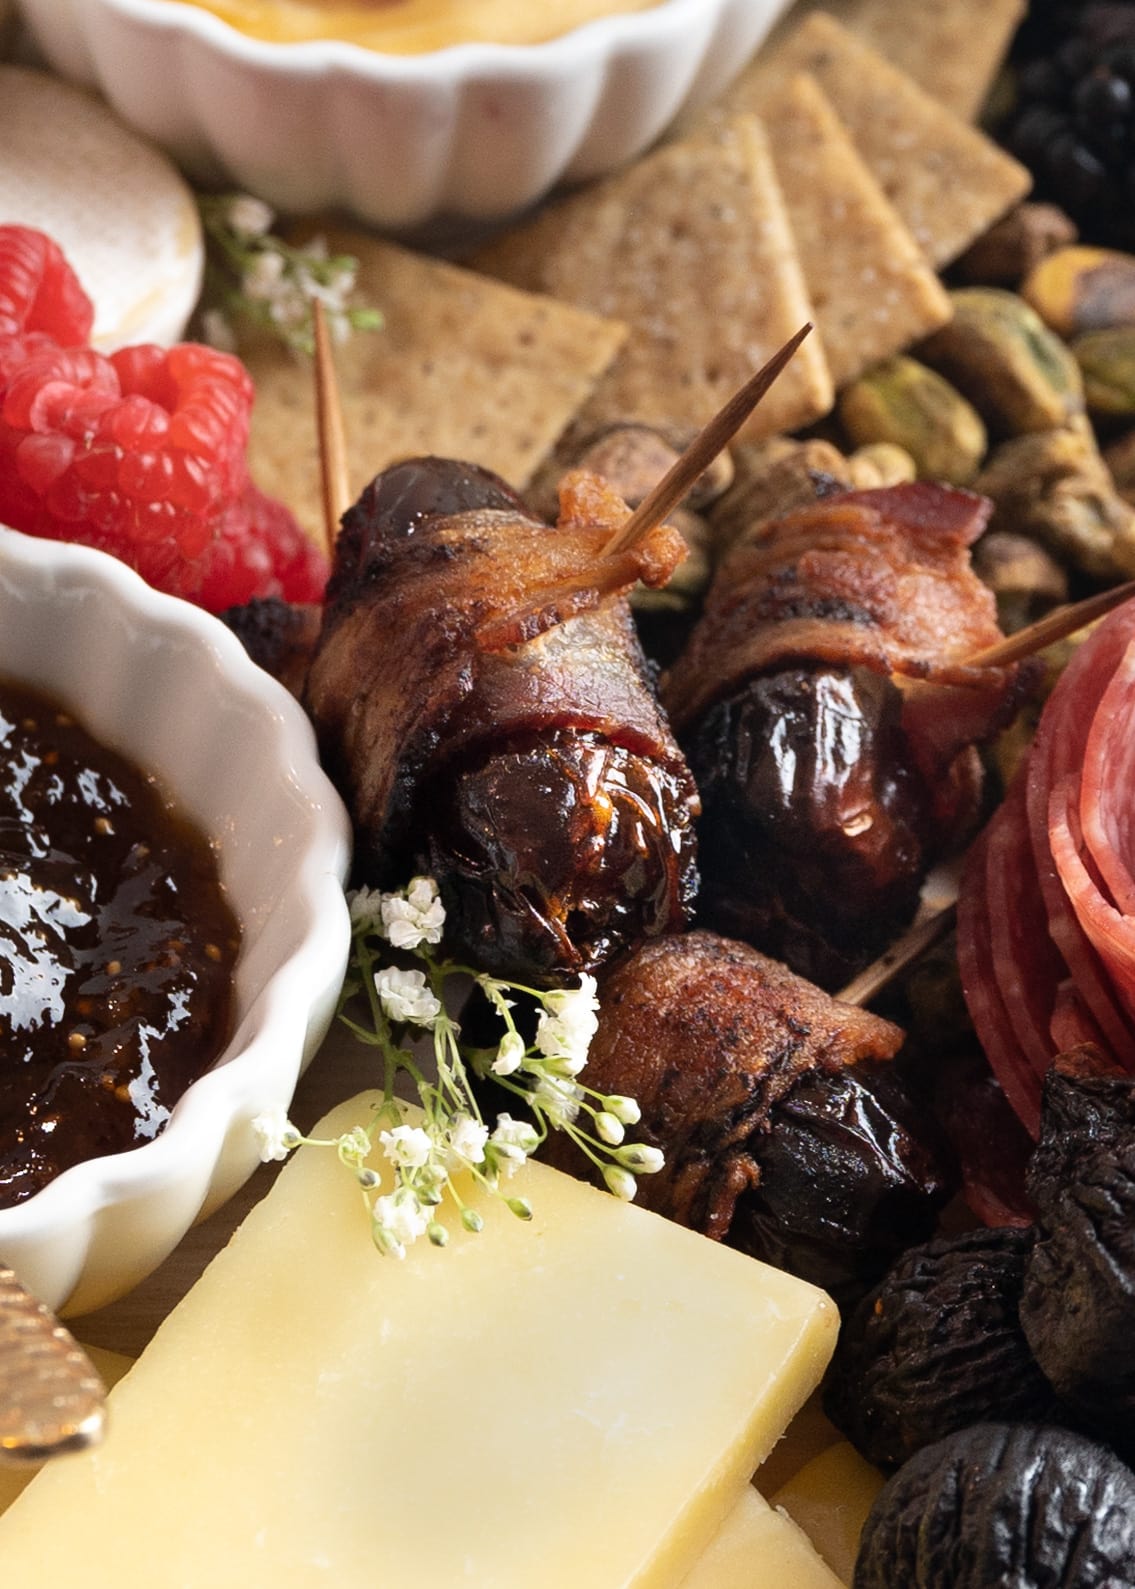 A close up picture of bacon wrapped dates with cheddar cheese, babys breath flowers, fig jam, pistachios, crackers, and dried figs.